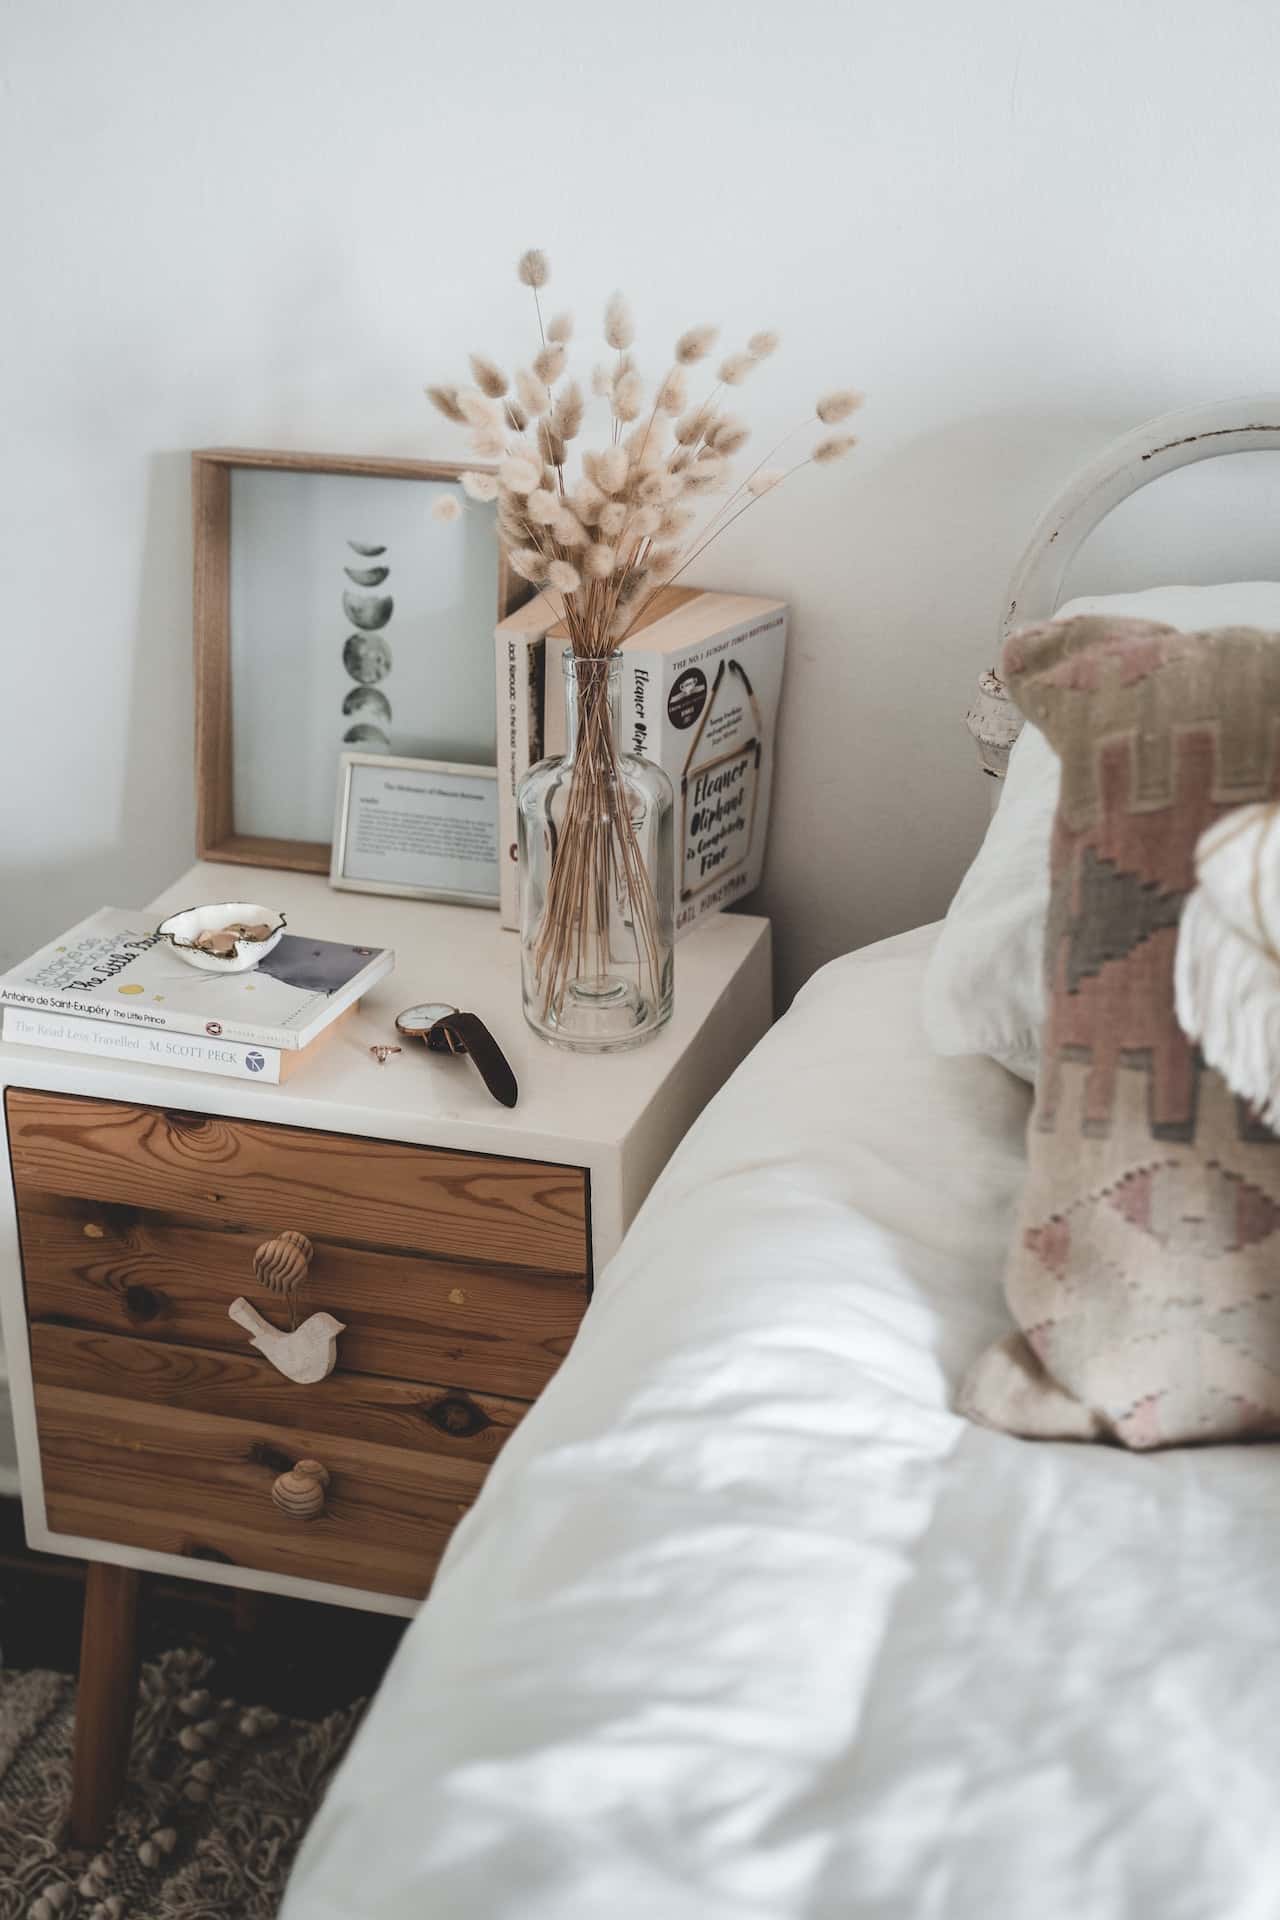 comfy bed and bedside table